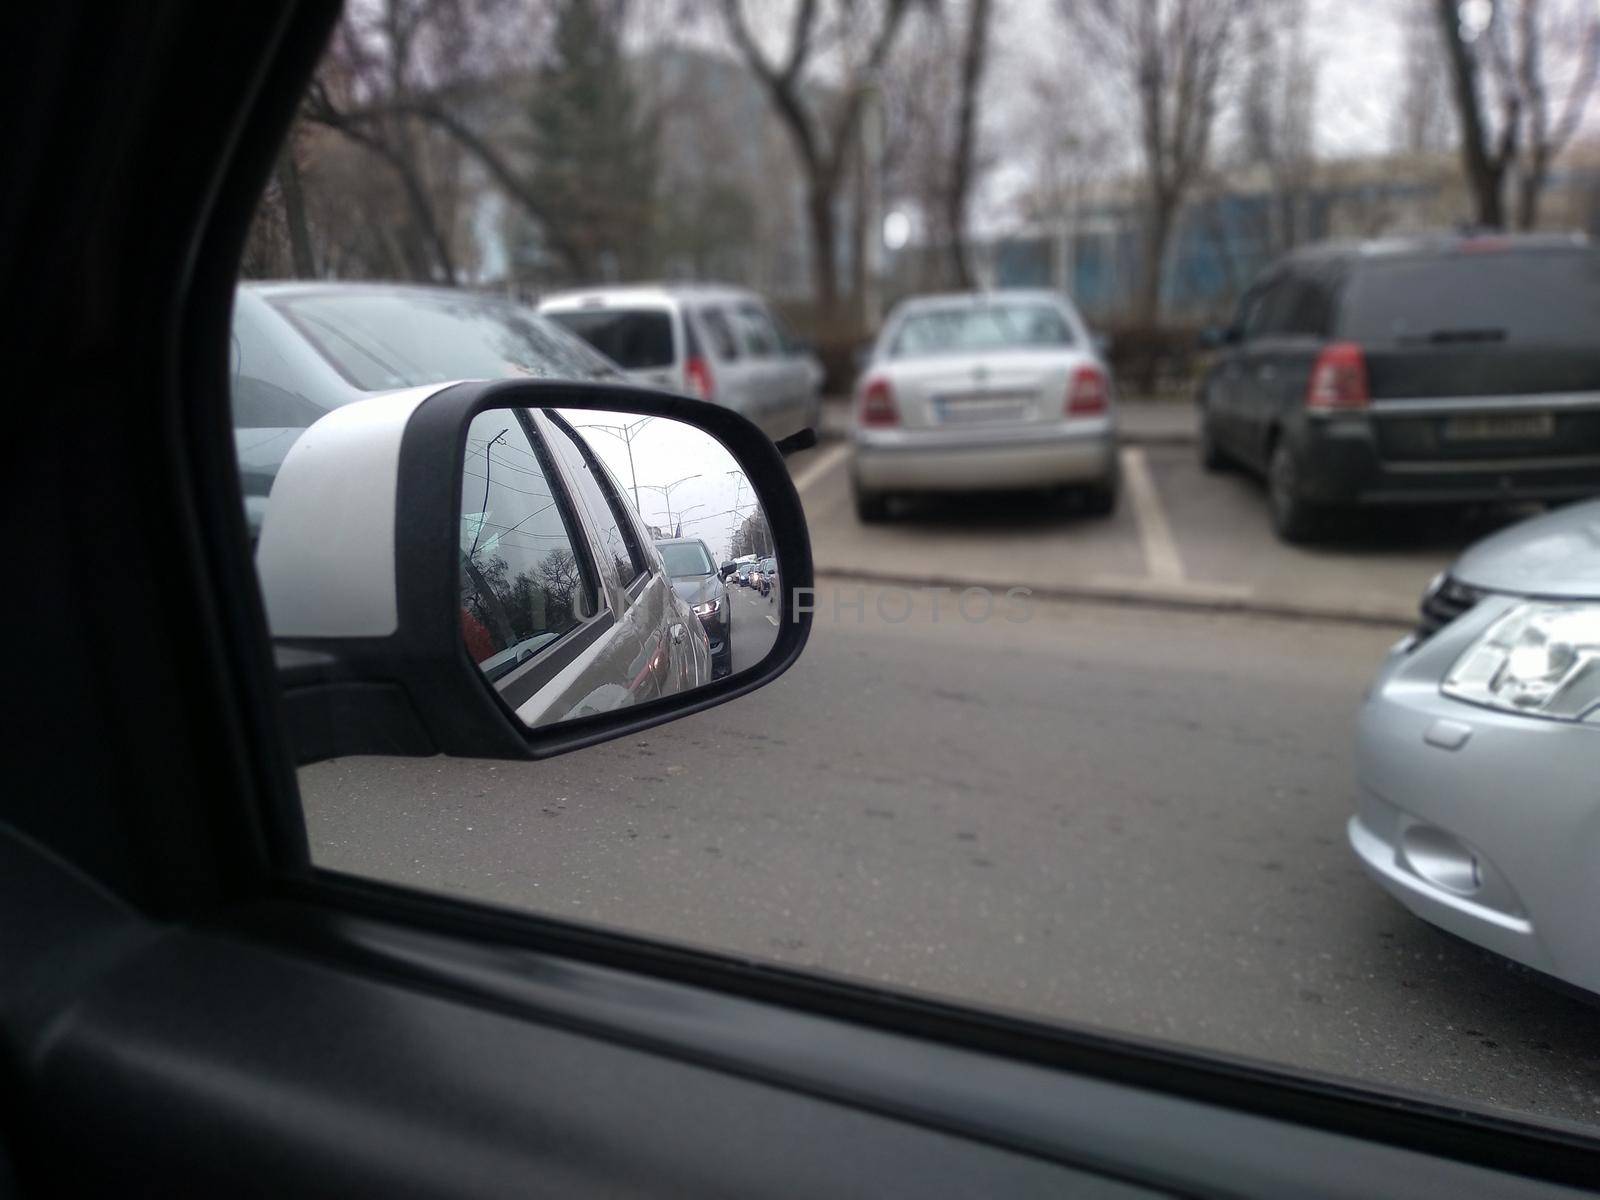 Road view through car window and mirror, cars on road in traffic in Bucharest, Romania, 2021 by vladispas